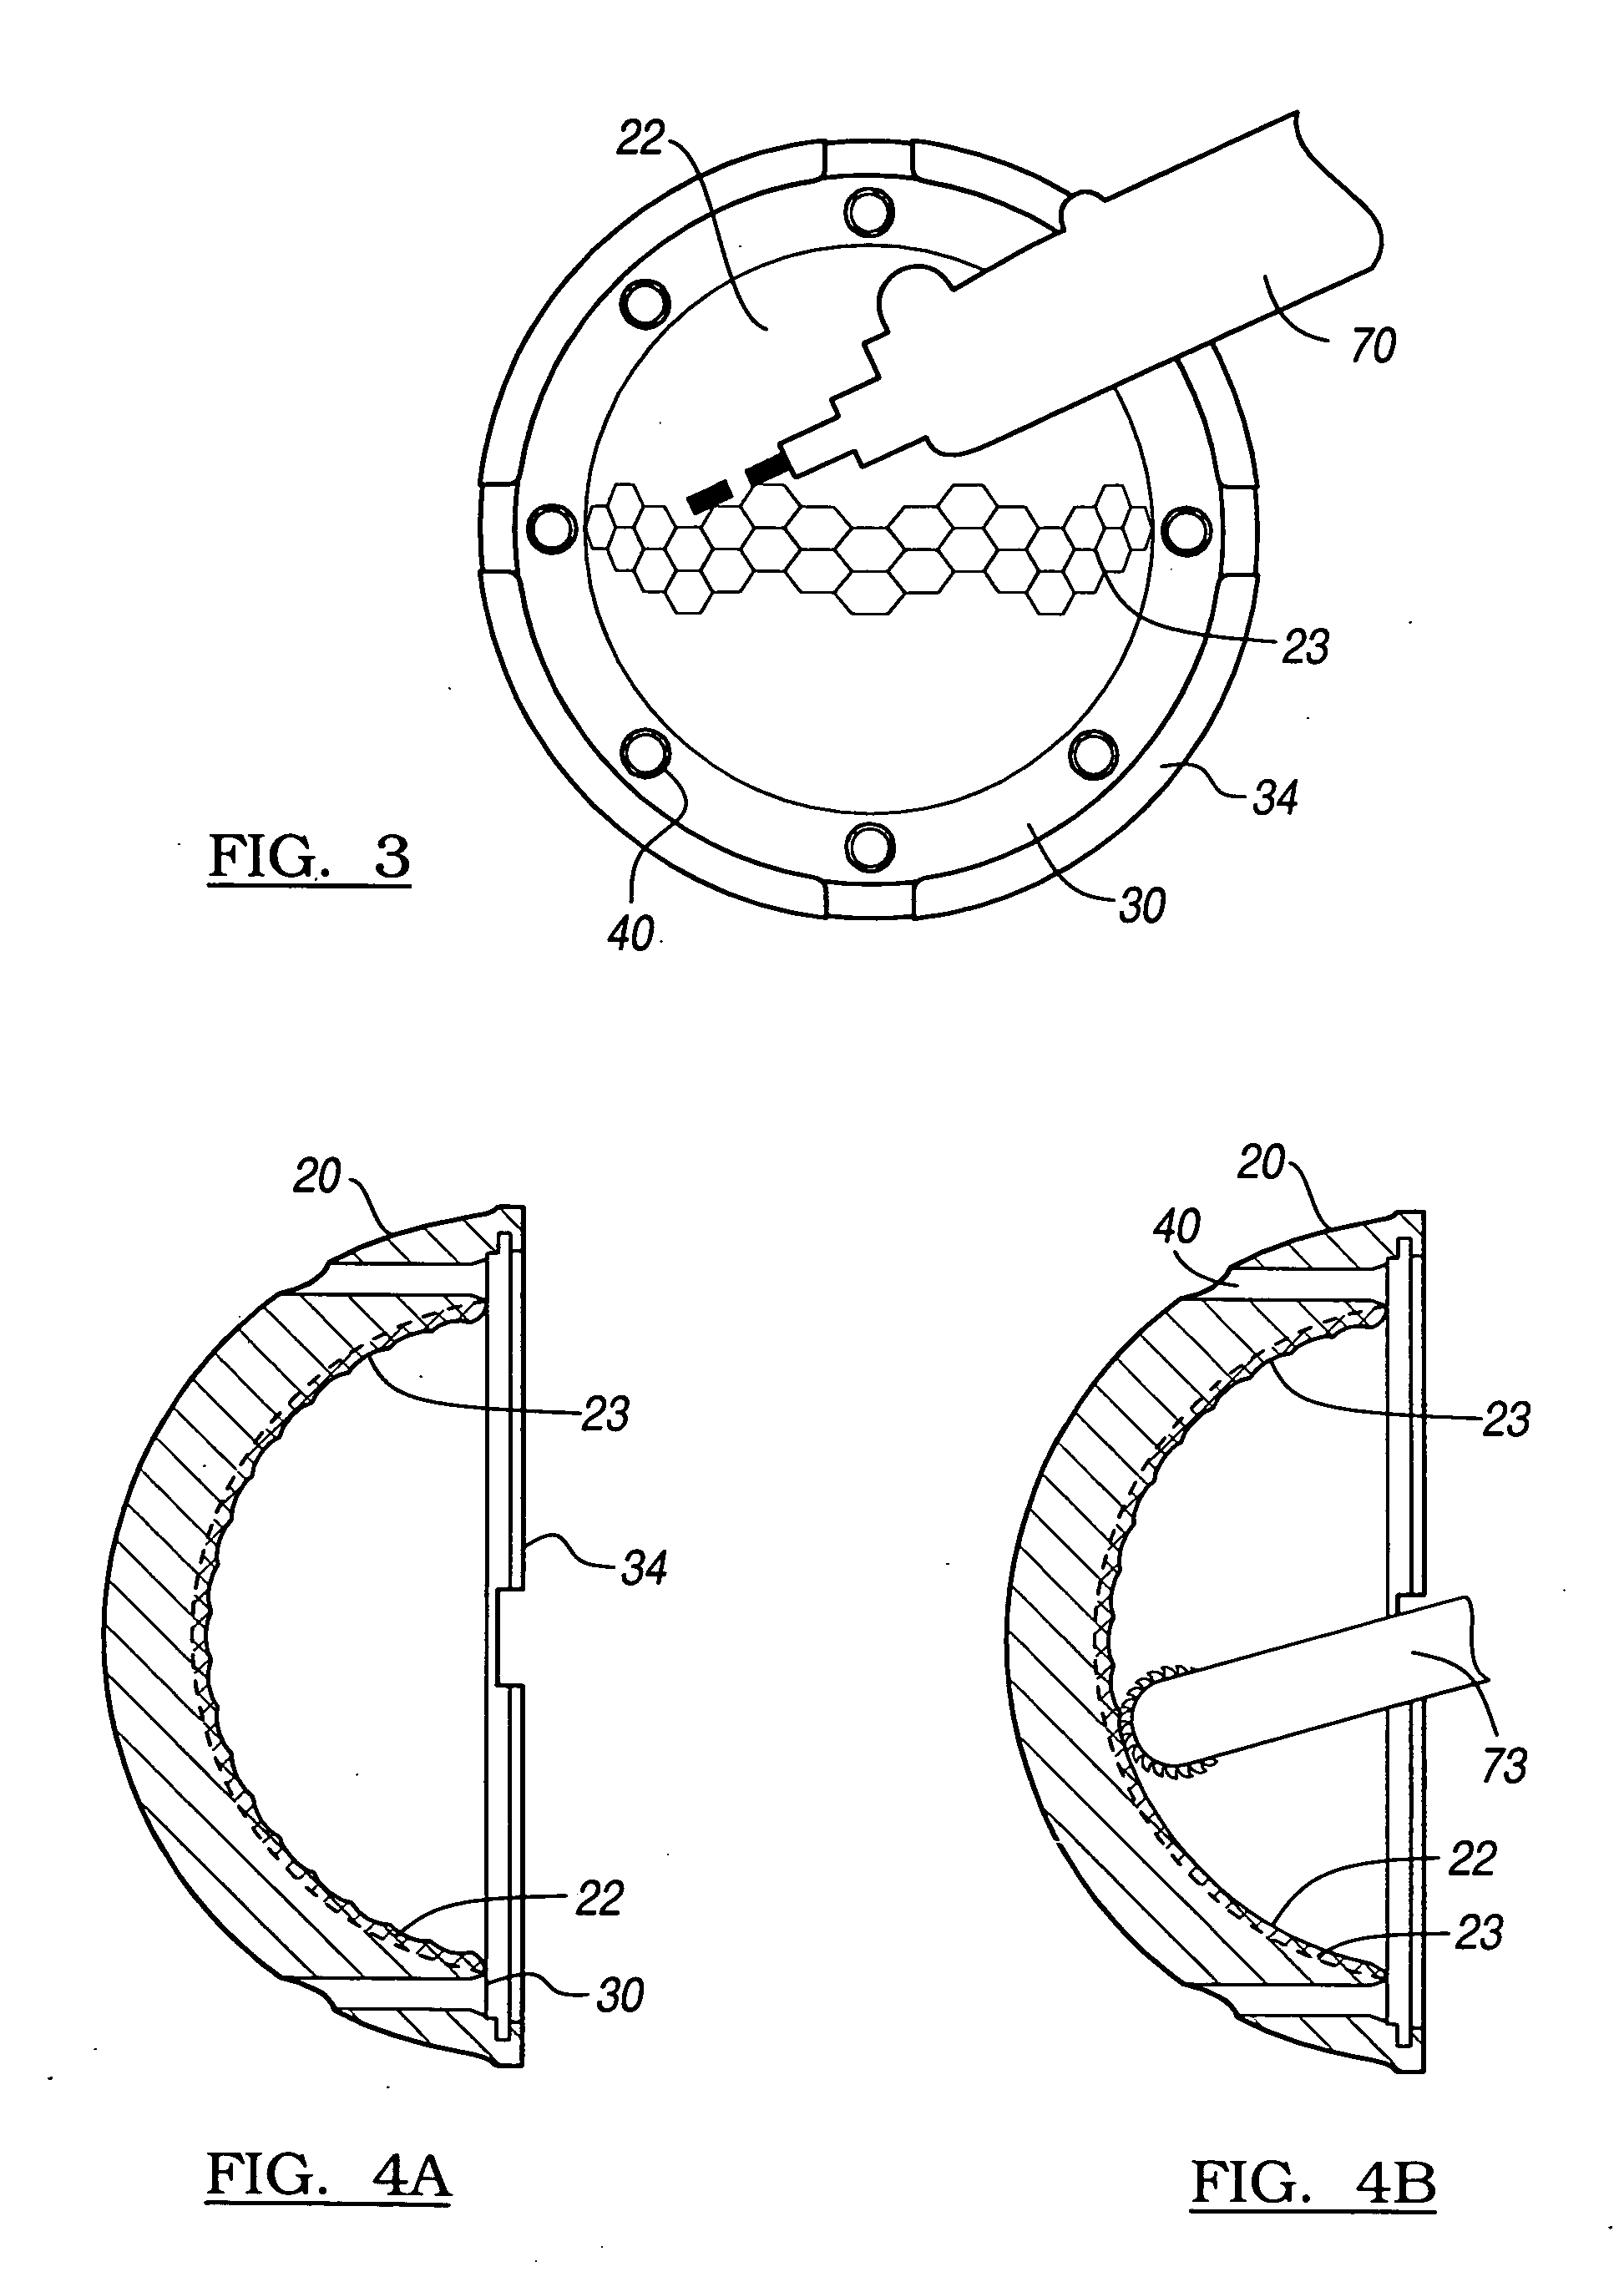 Method and apparatus for surface hardening implants